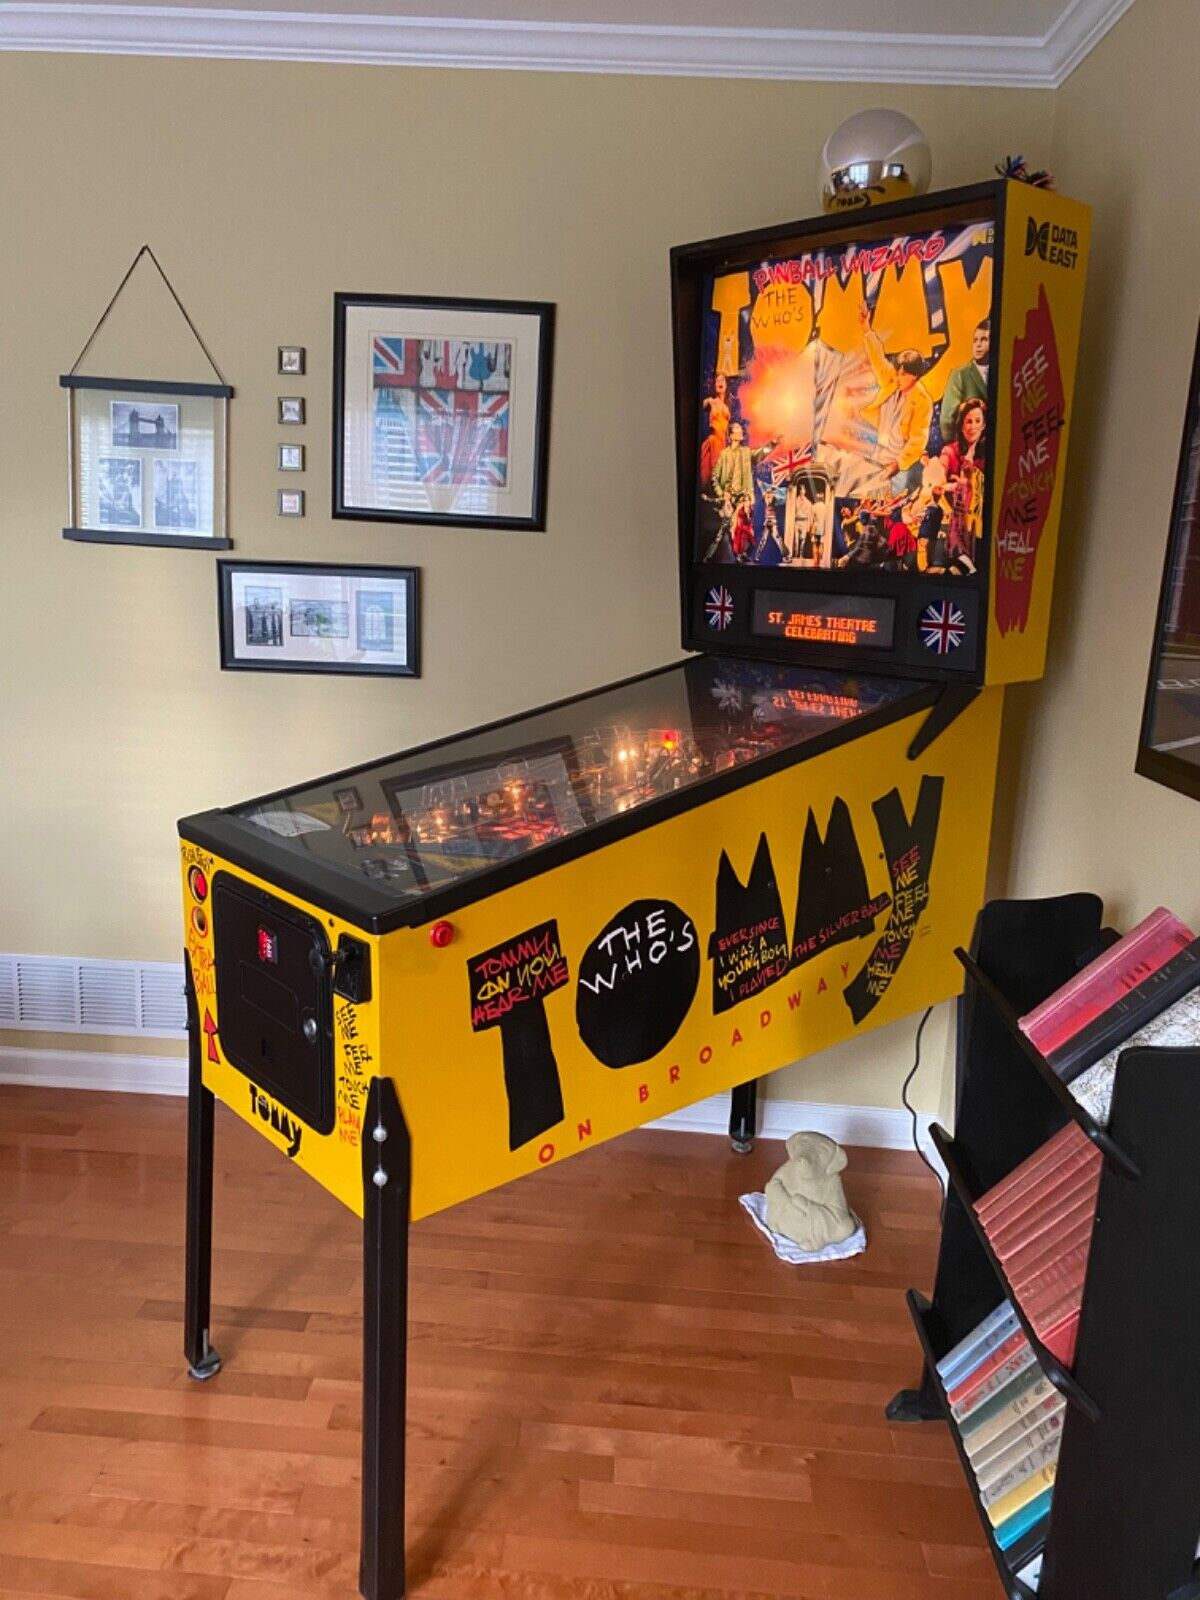 Tommy Tommy Pinball Machine from Broadway musical l